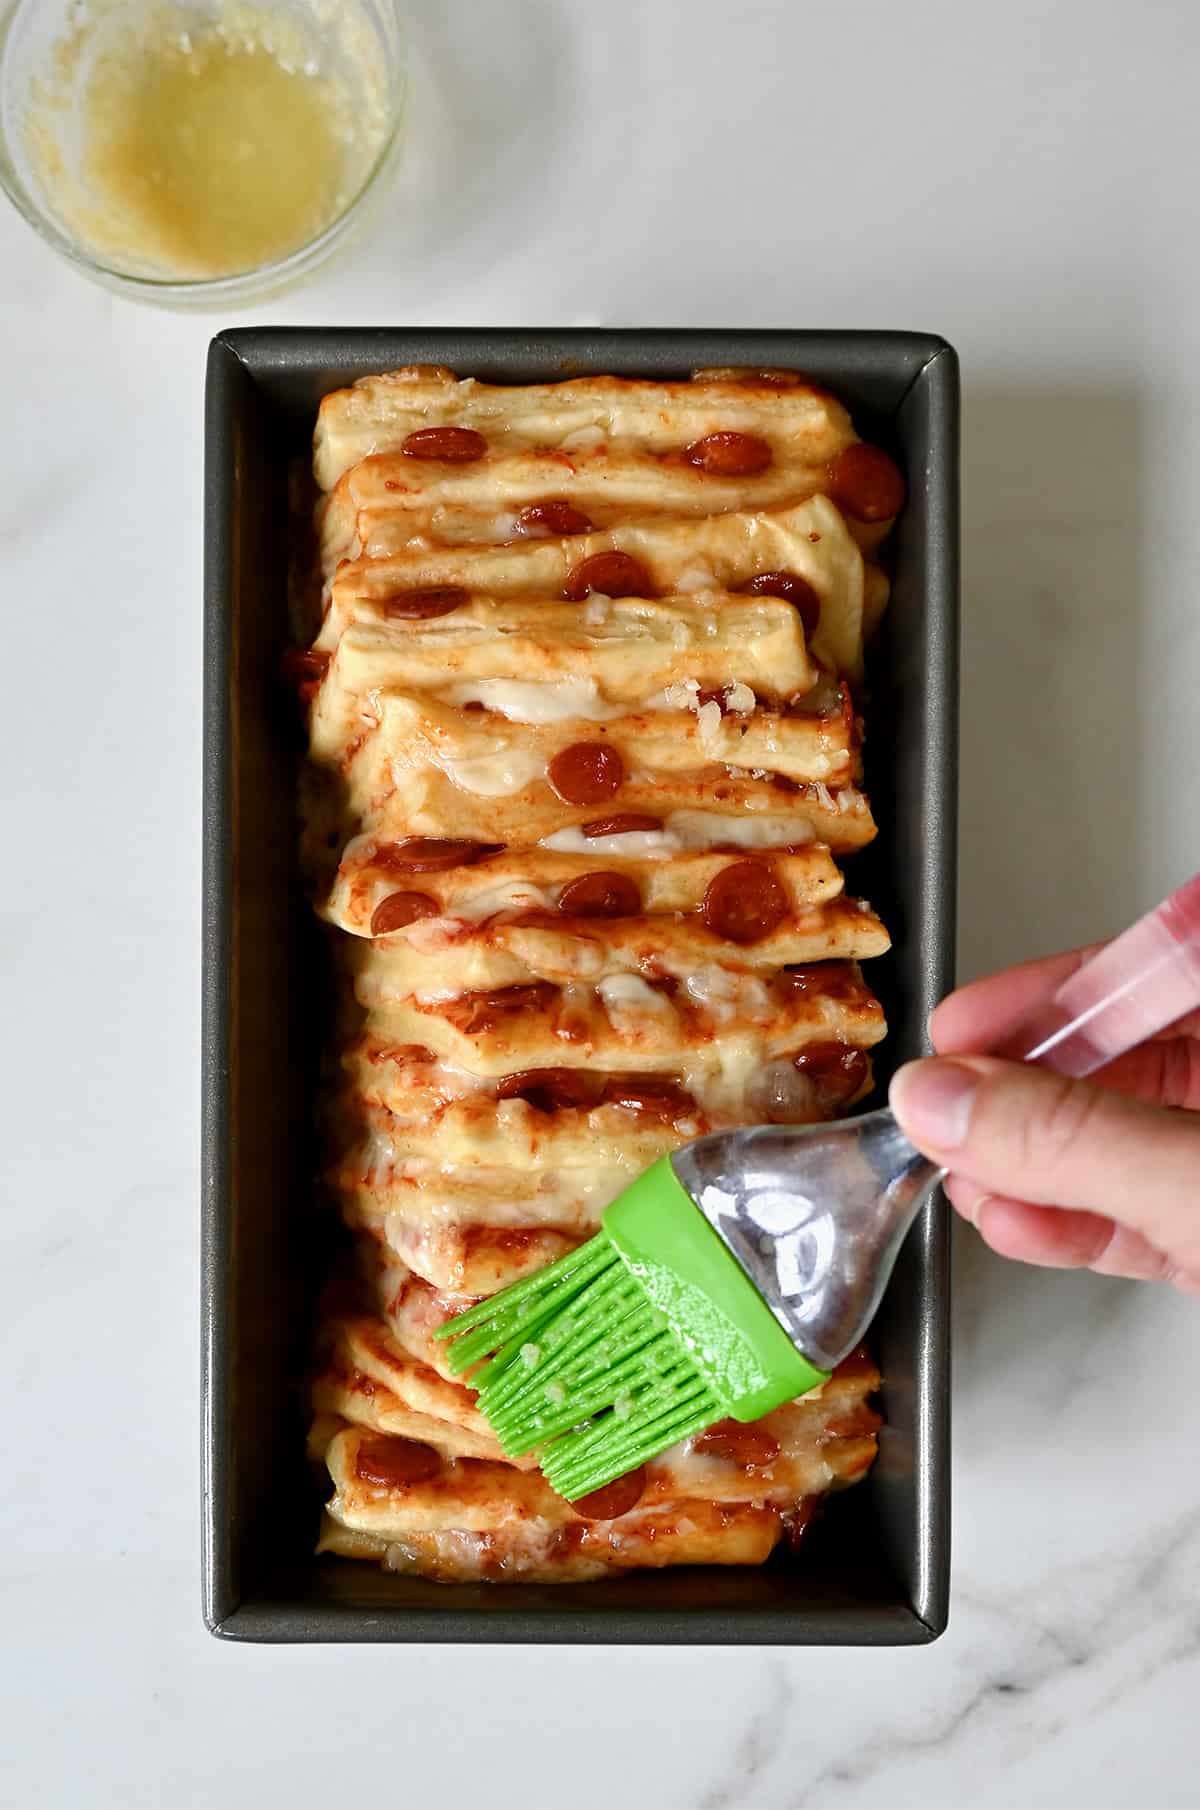 A hand holding a pastry brush applies garlic butter atop unbaked pizza bread in a loaf pan.